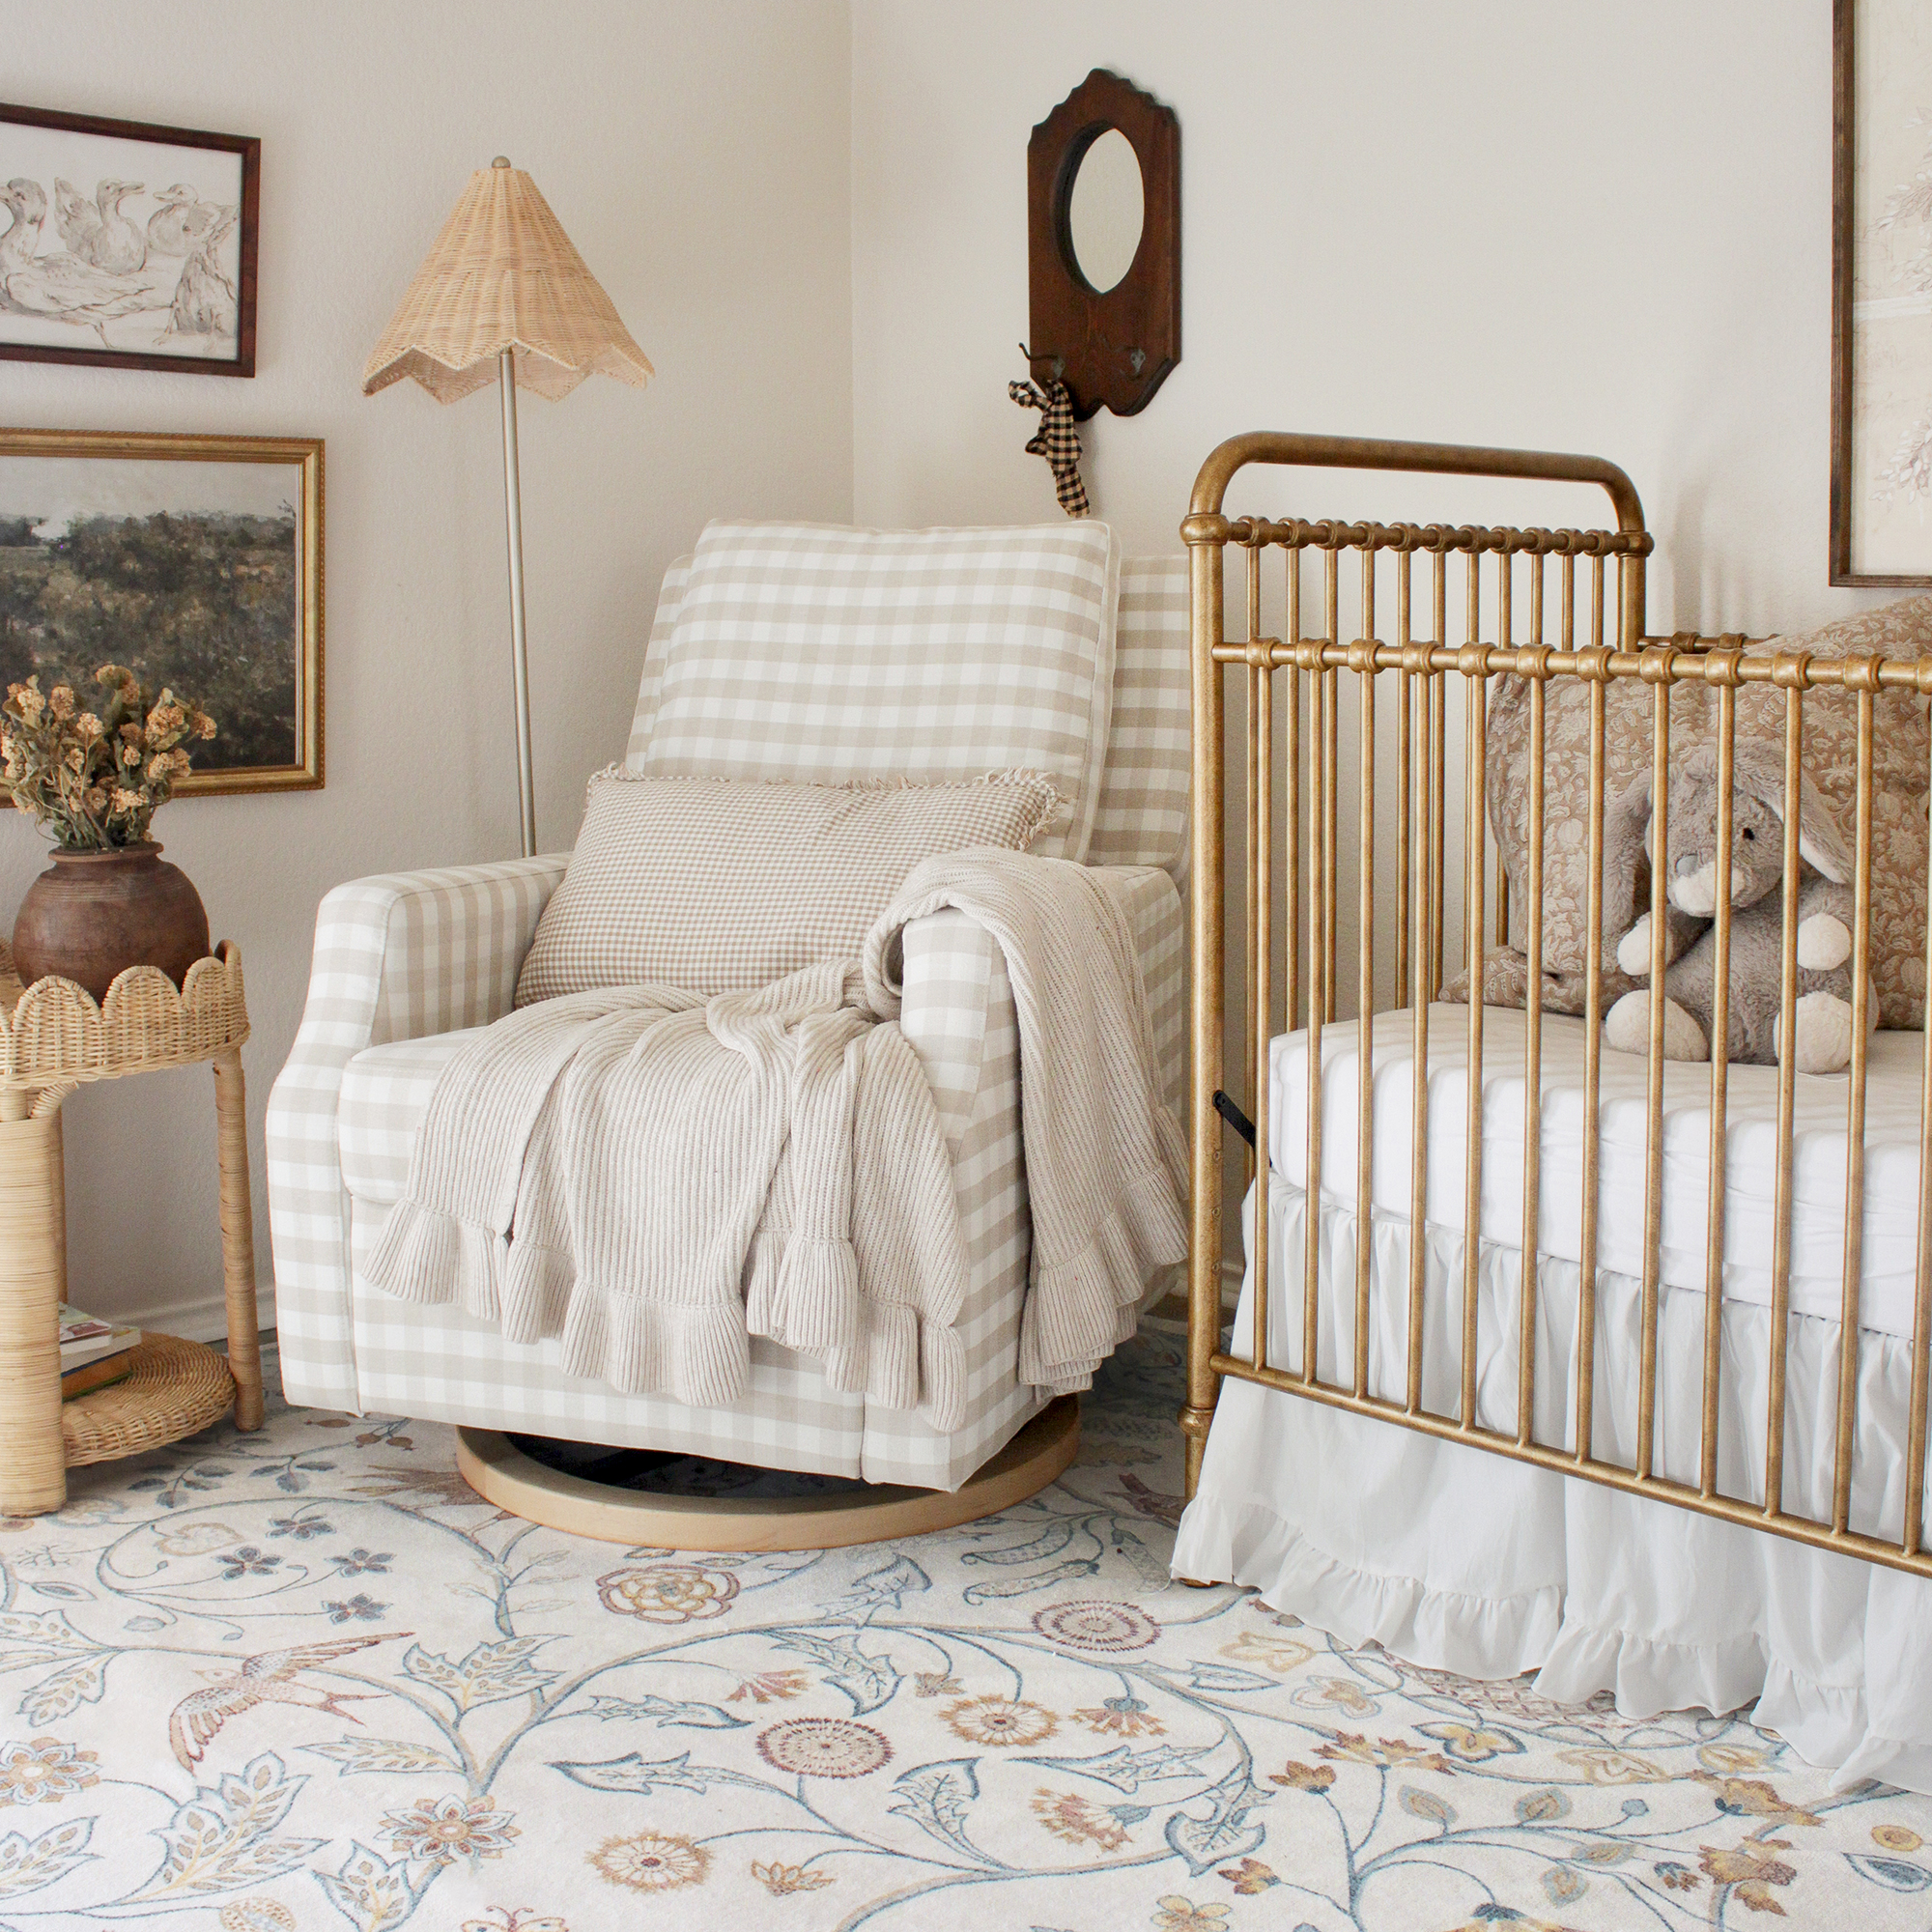 Nursery with pastel rug under cot and nursing chair